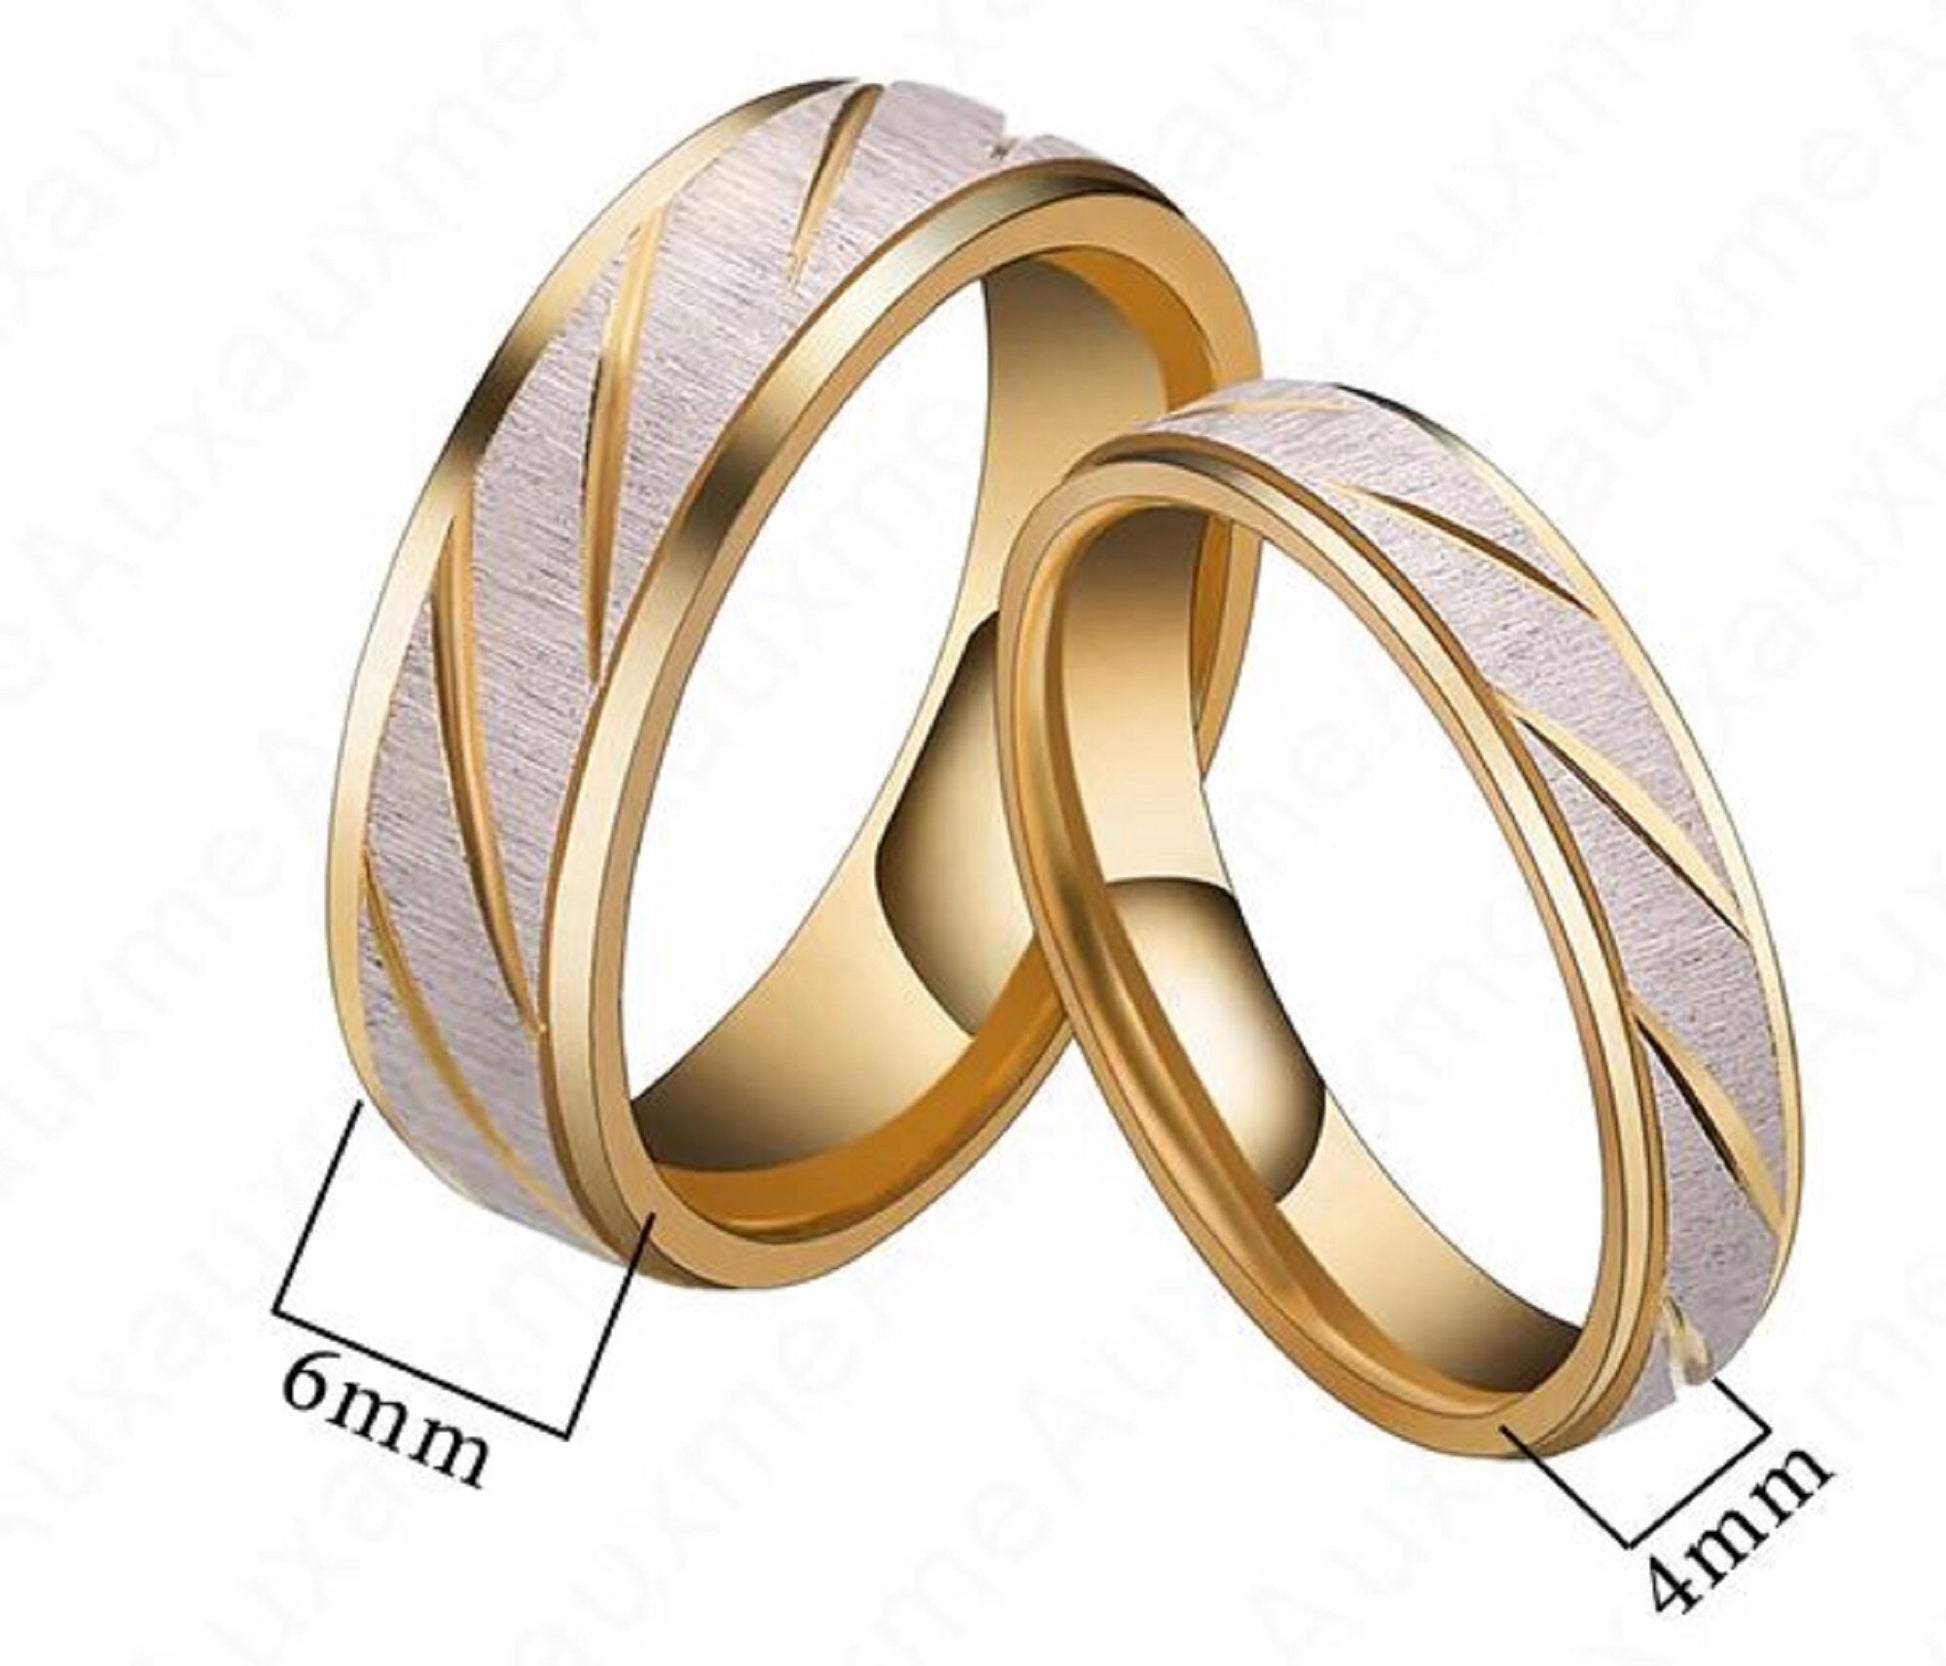 Frosted Silver Titanium Steel Couples Ring Set for Him & Her - Diagonal Stripe Gold Color - Friendship, Promise, Engagement, Wedding.